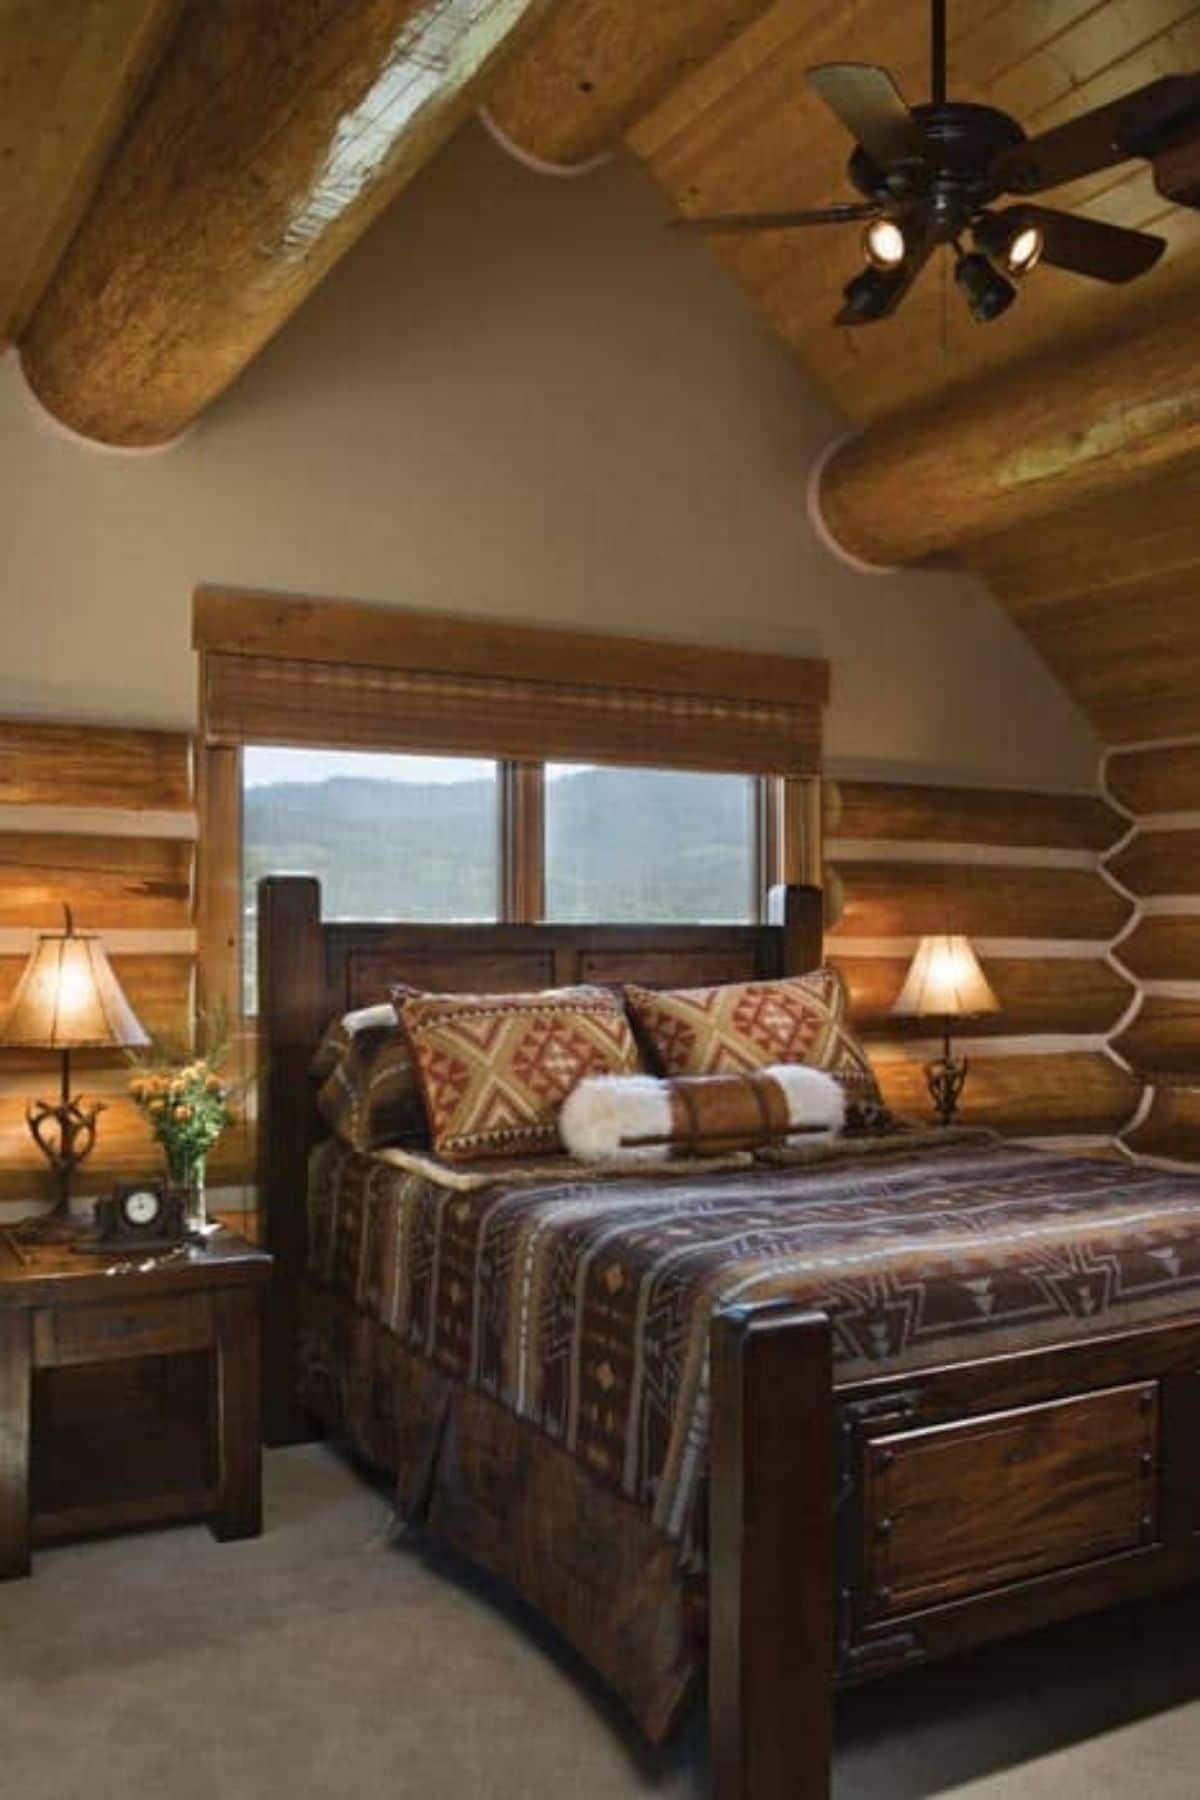 bed with brown blanket against window in log cabin room